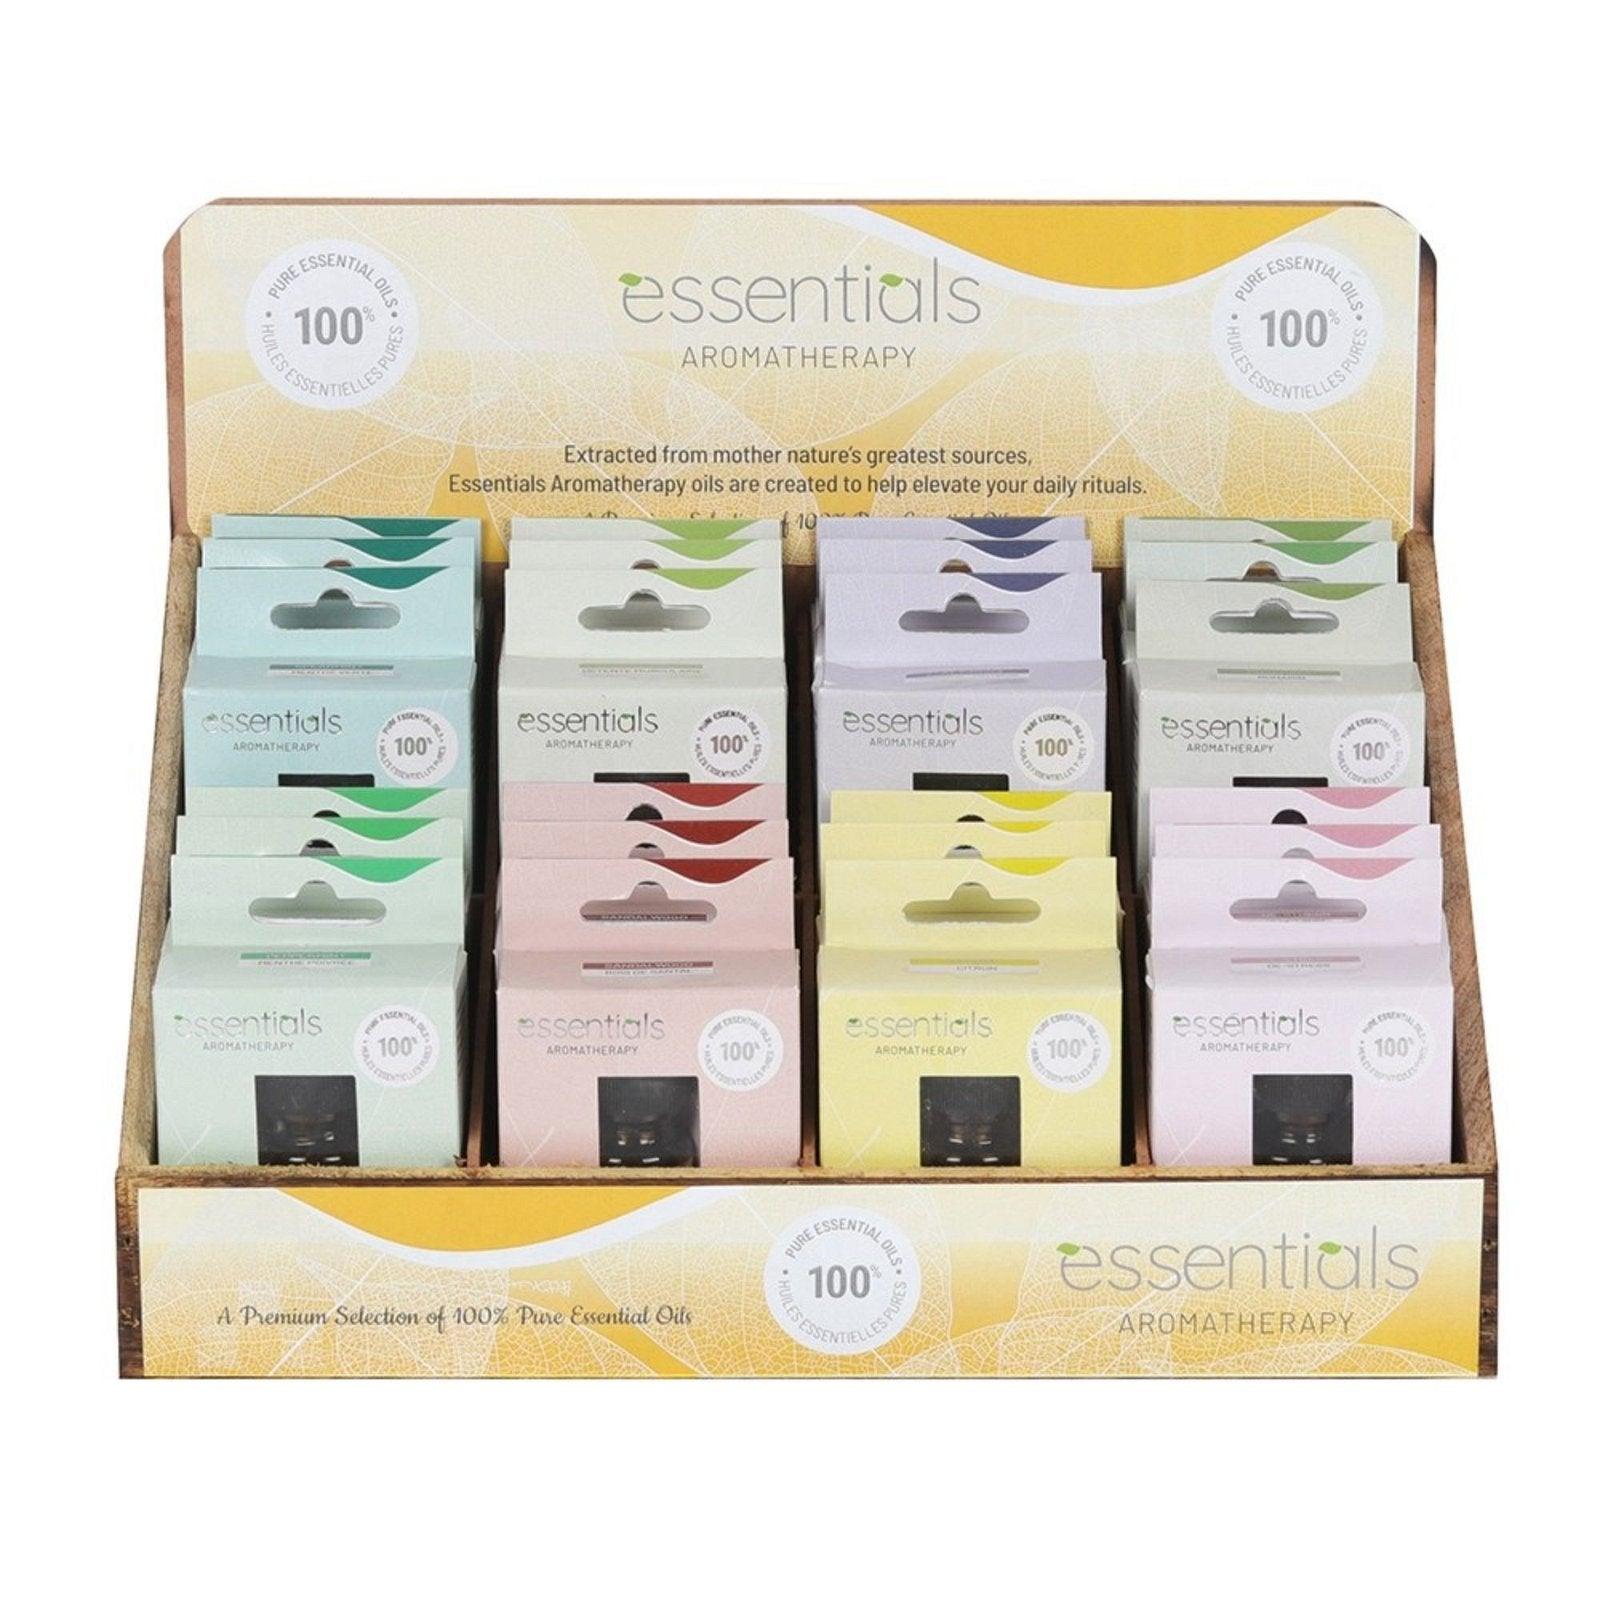 View Pack of 8 x 10ml Essentials Aromatherapy Oil information